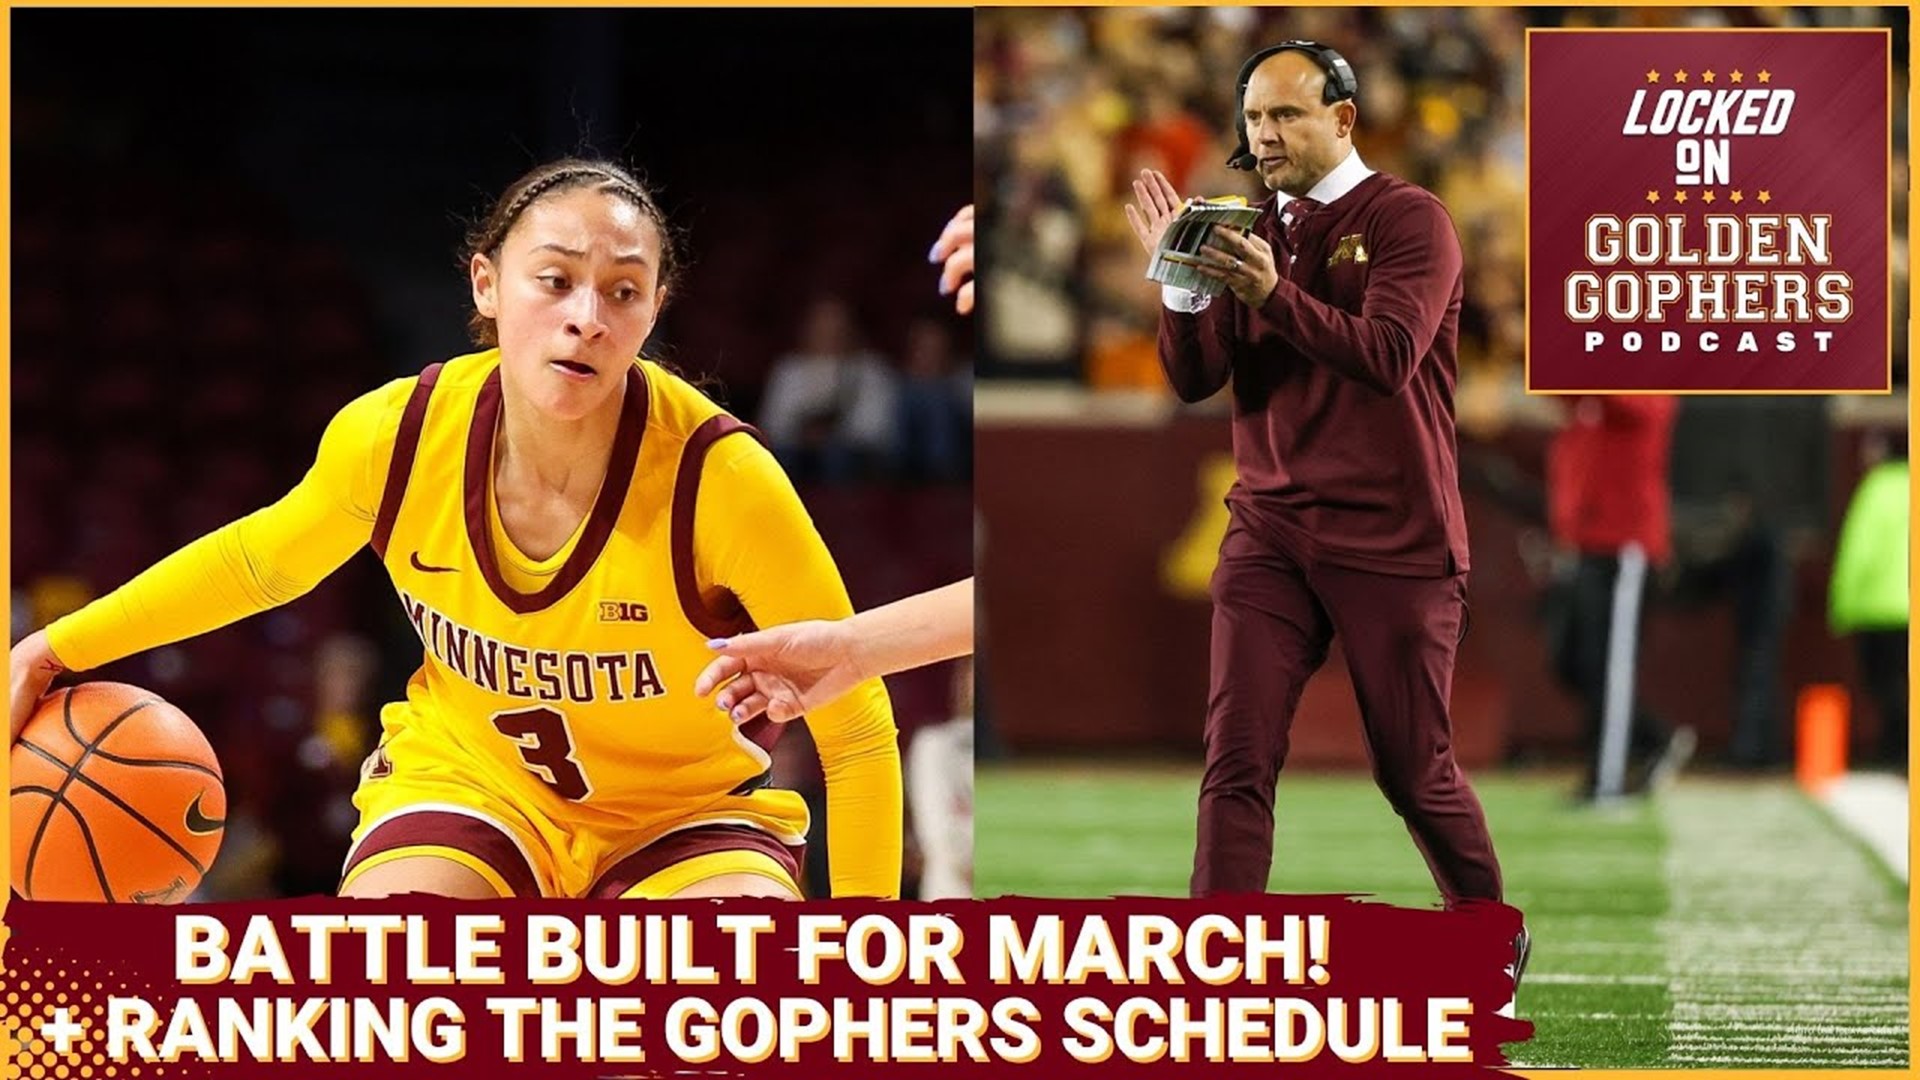 On today's Locked On Golden Gophers, host Kane Rob, discusses how the Minnesota Gophers WBB team could win the whole WNIT and why Amaya Battle is built for March.